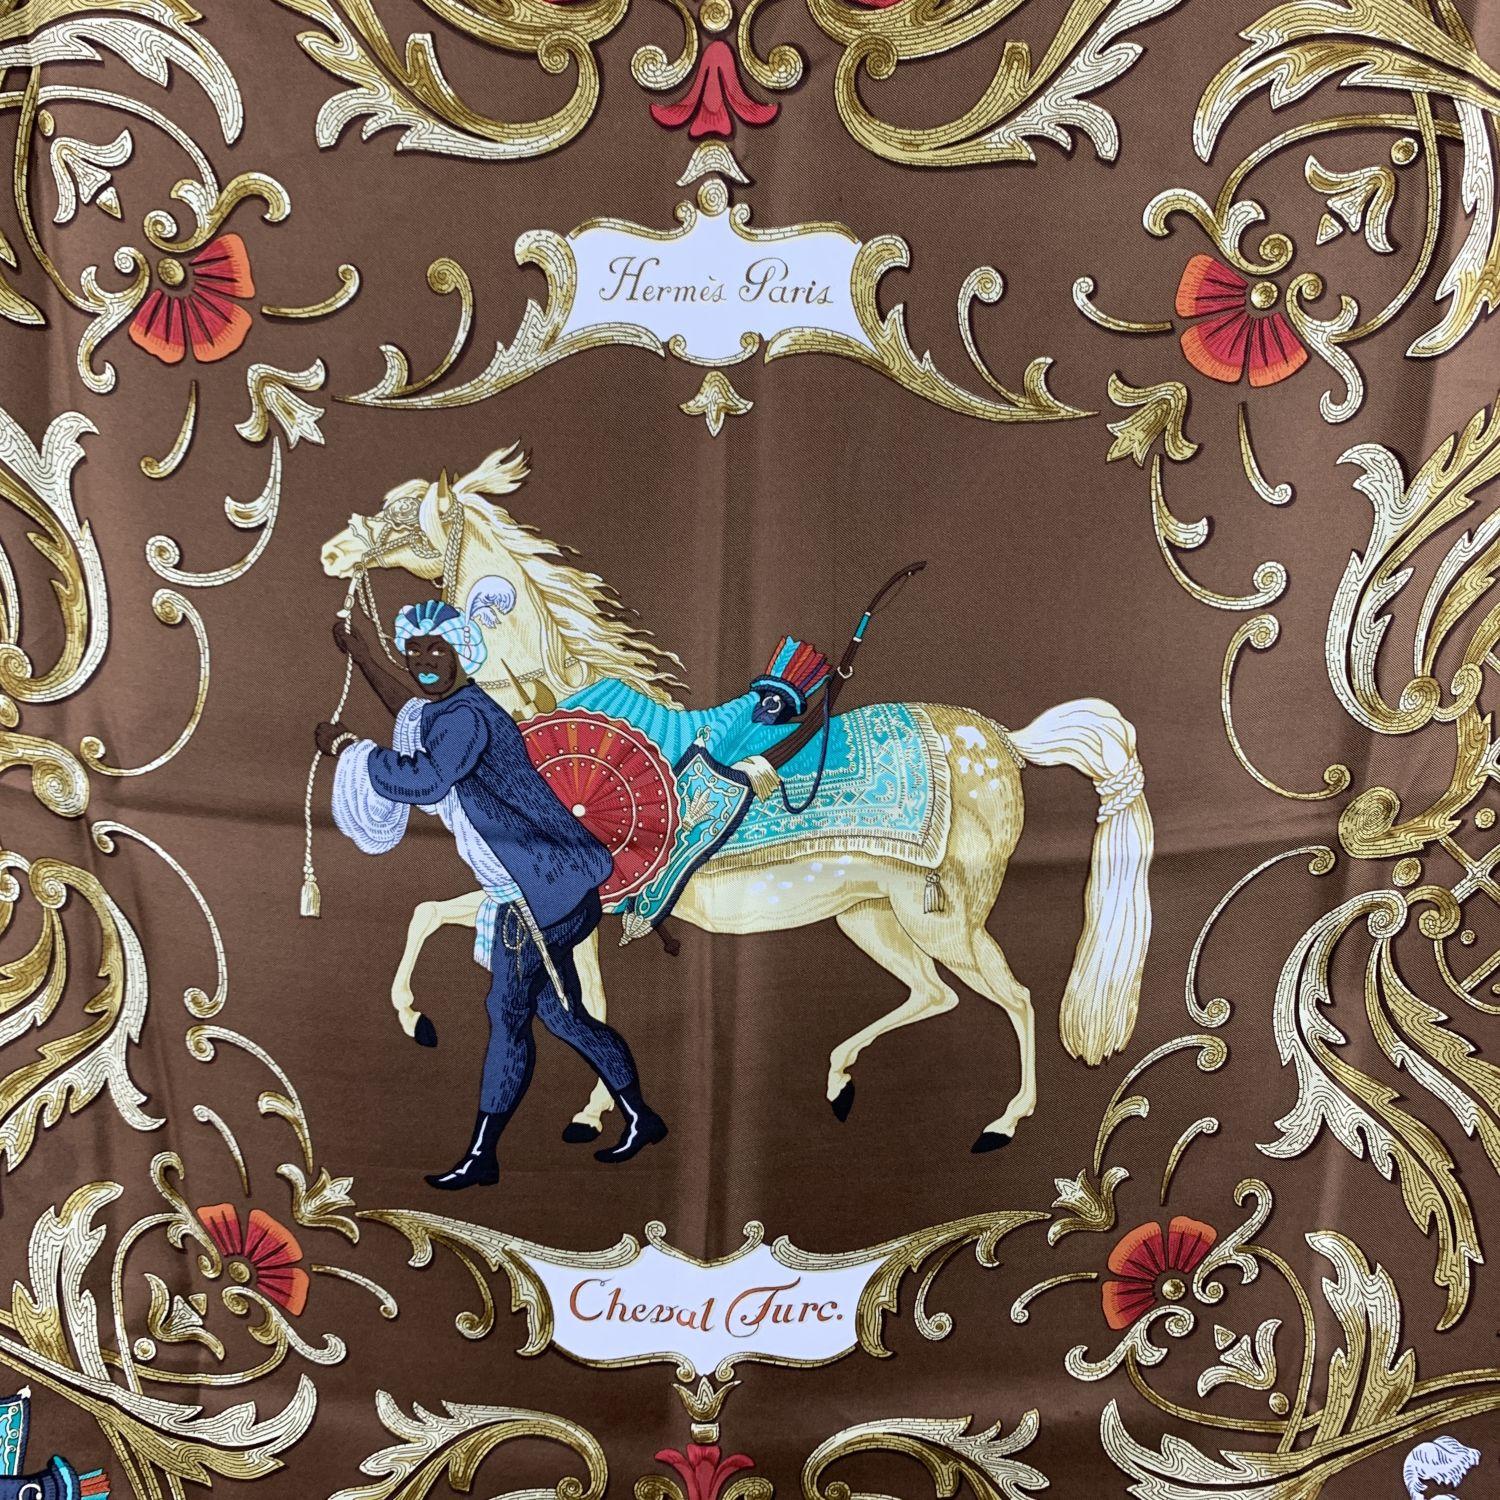 Vintage Hermes silk scarf 'Cheval Turc' scarf designed by Christiane Vauzelles and first issued in 1969. It features an equestrian theme scarf features a man with a turban leading a horse with a brown background. Features hand rolled edges. Approx.